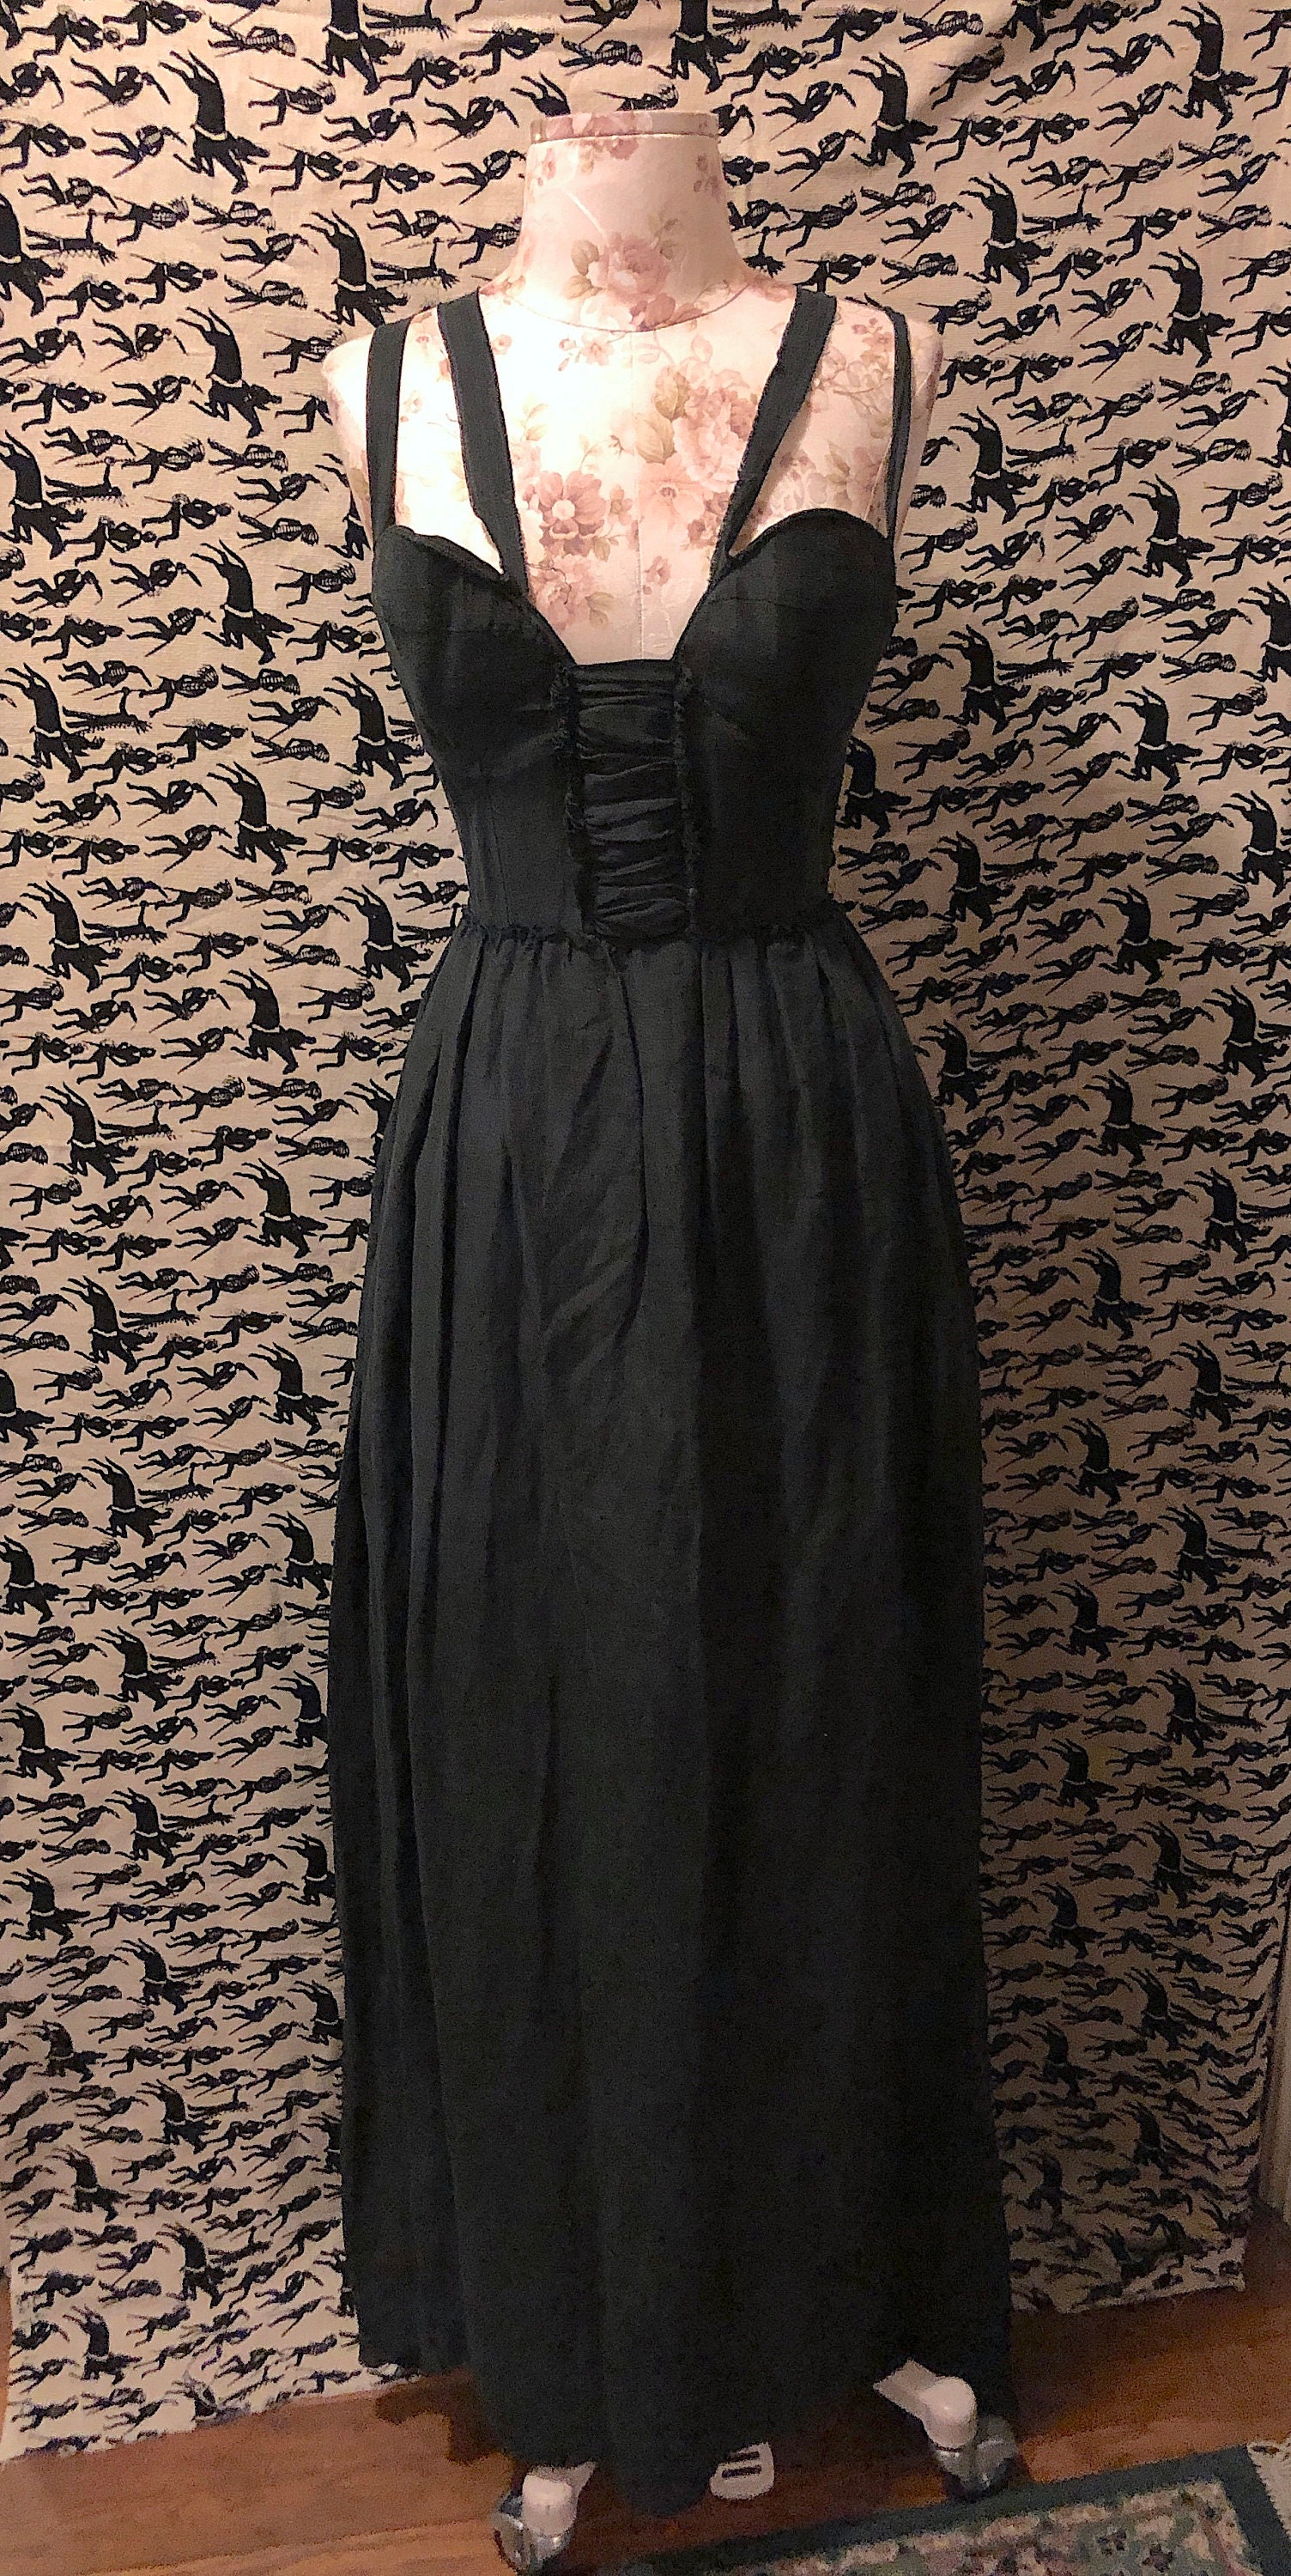 Vintage 1930s Style Black Silk Gown Remade Gown Avant Garde Maxi Greek  Goddess Gown Costume Cocktail Party Old Hollywood Theatrical Gown 